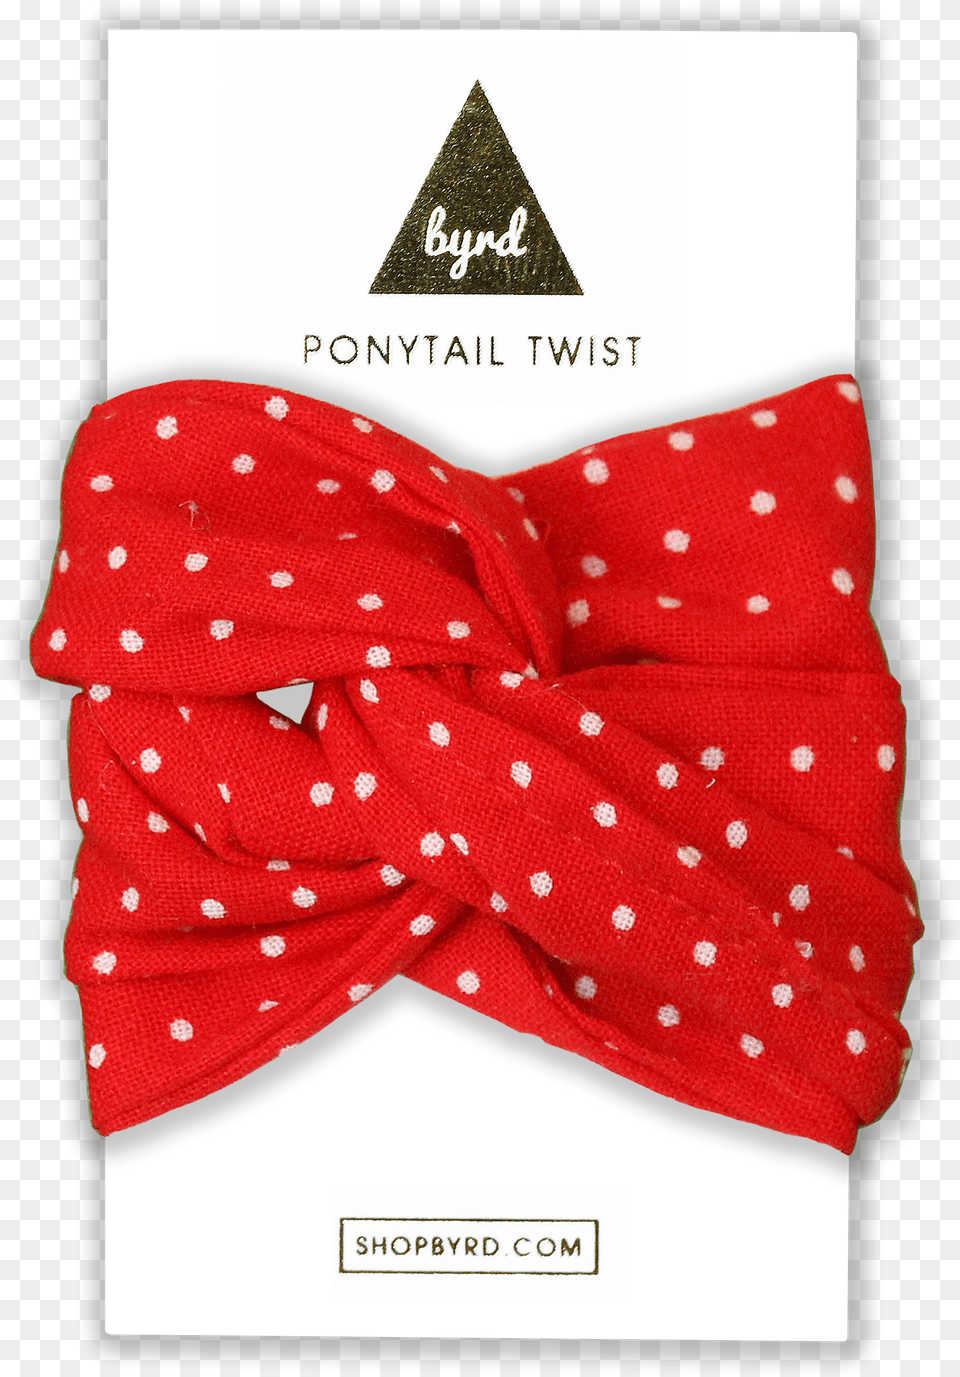 Of Red And White Polka Dot Twist Polka Dot, Accessories, Formal Wear, Tie, Bow Tie Png Image